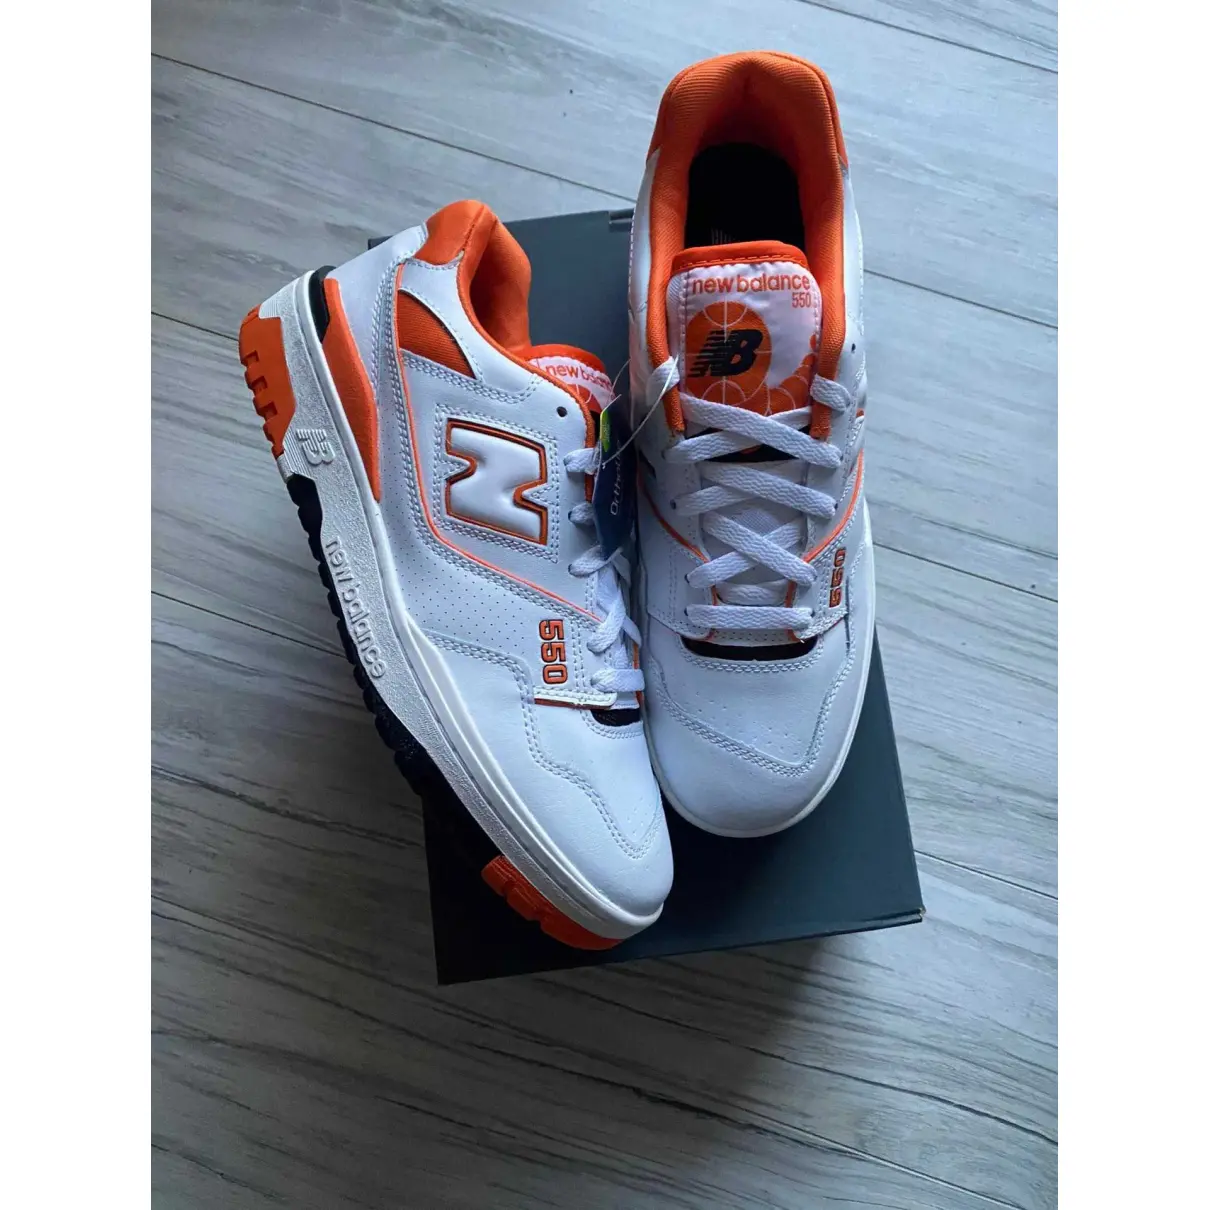 Buy New Balance 550 leather low trainers online